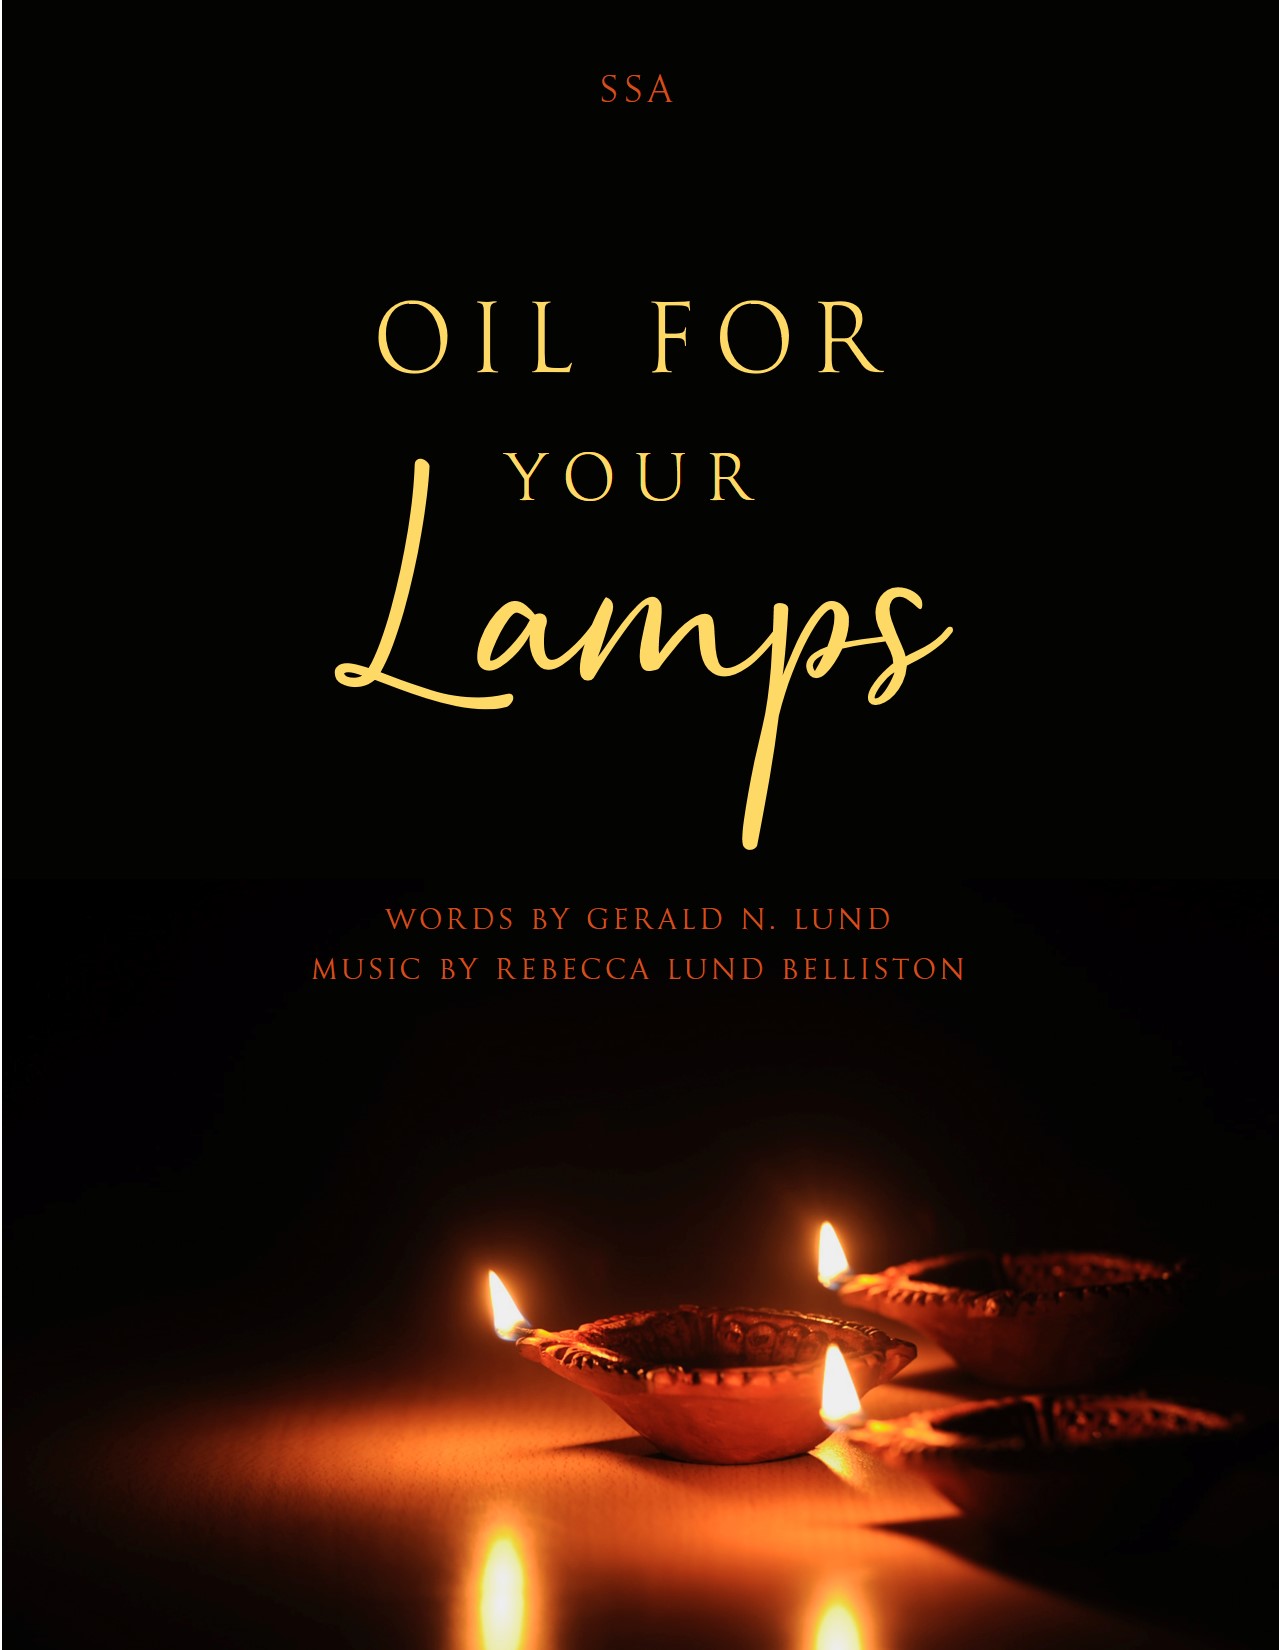 Oil_for_your_lamps_ssa